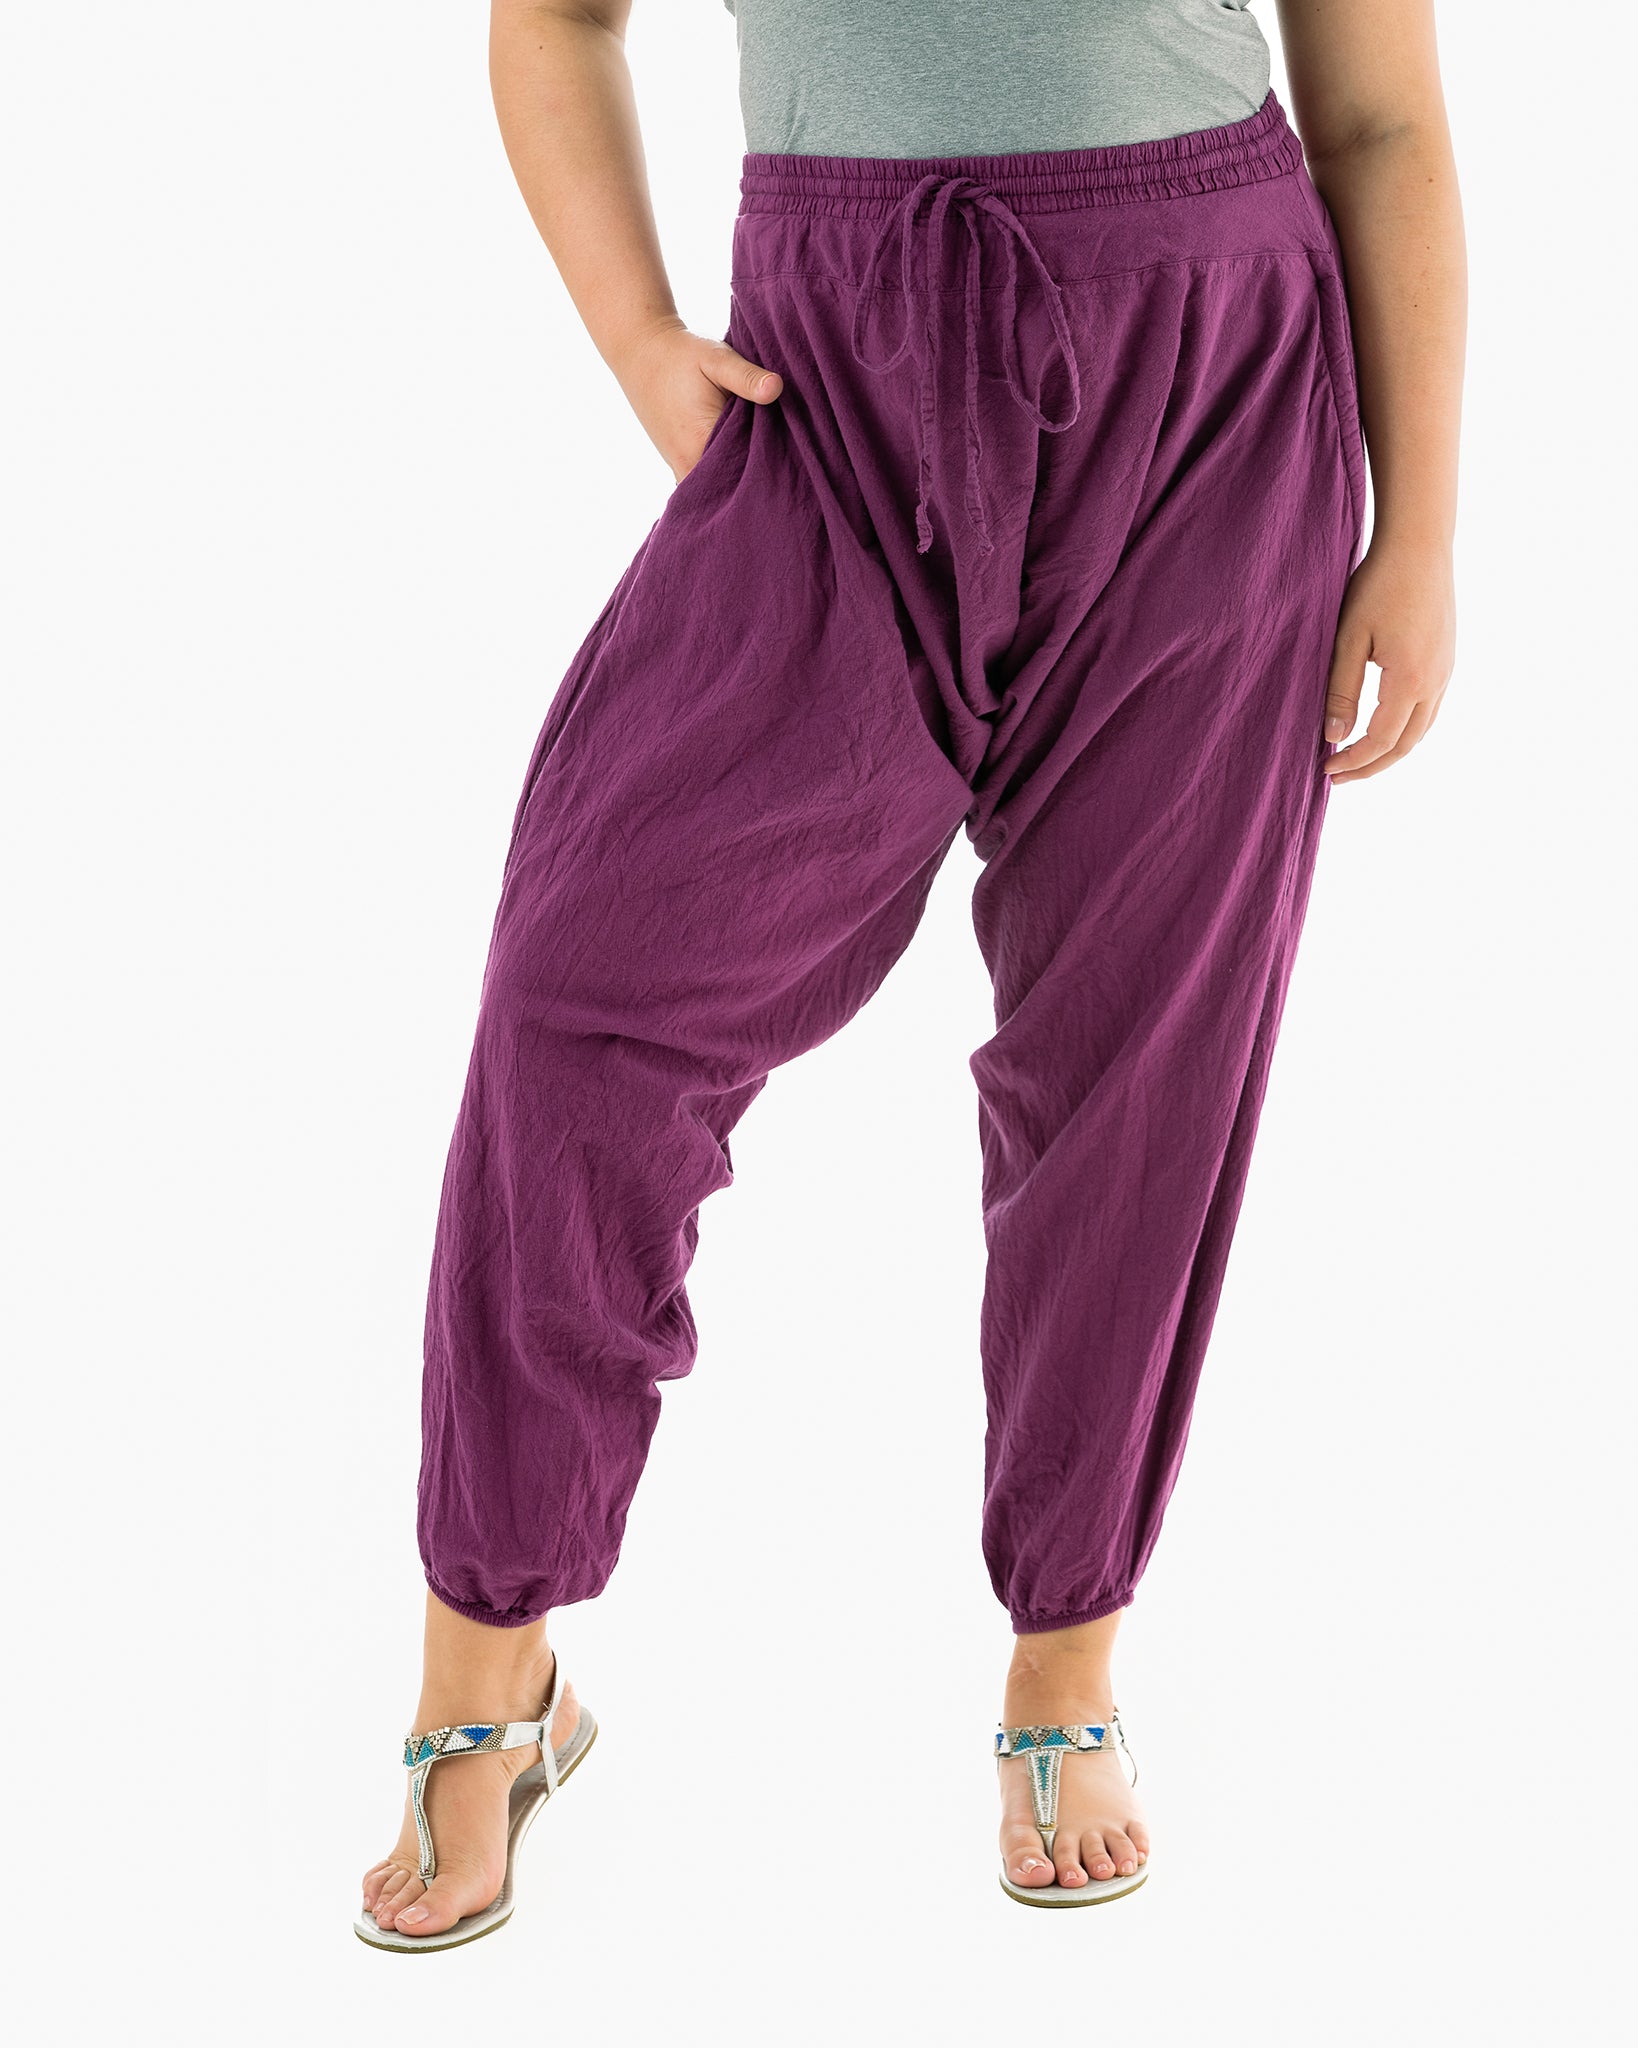 Buddha Pants - Must have turquoise winter pants! Only $39 10 days